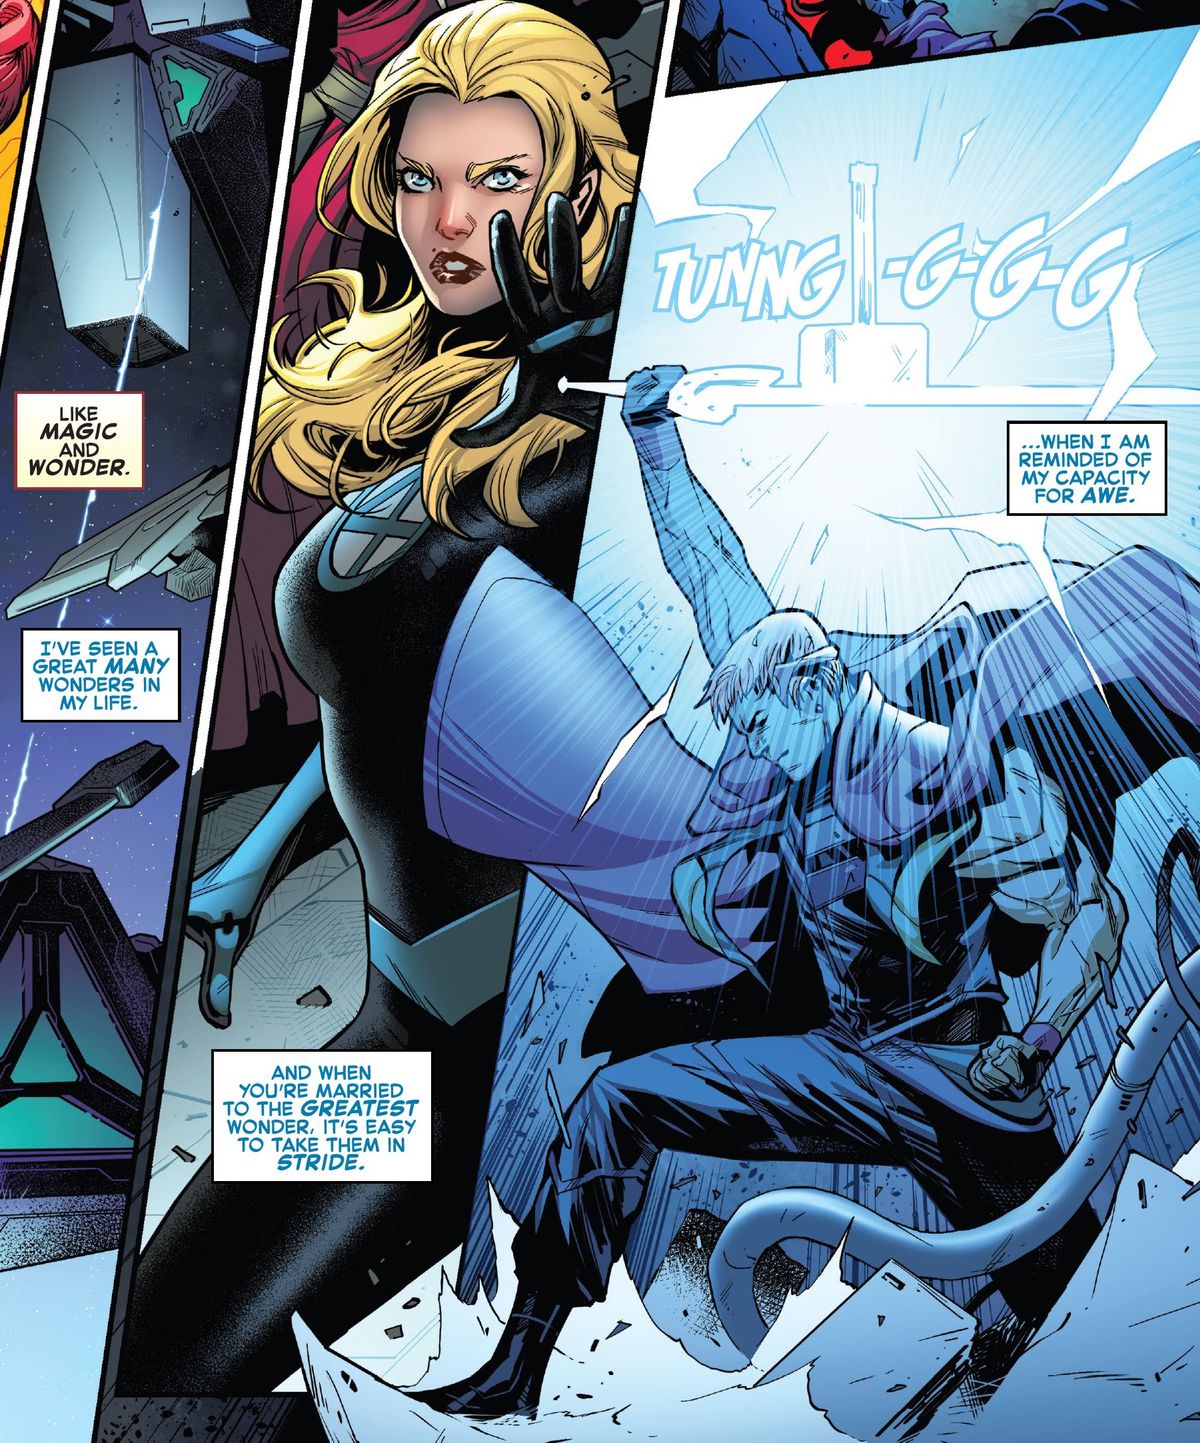 Teddy Altman/Hulkling blocks Thor’s hammer Mjolnir with his sword, in a blast of white hot electric light and a ringing “TUNNG-G-G-G,” in Empyre #1, Marvel Comics (2020). 